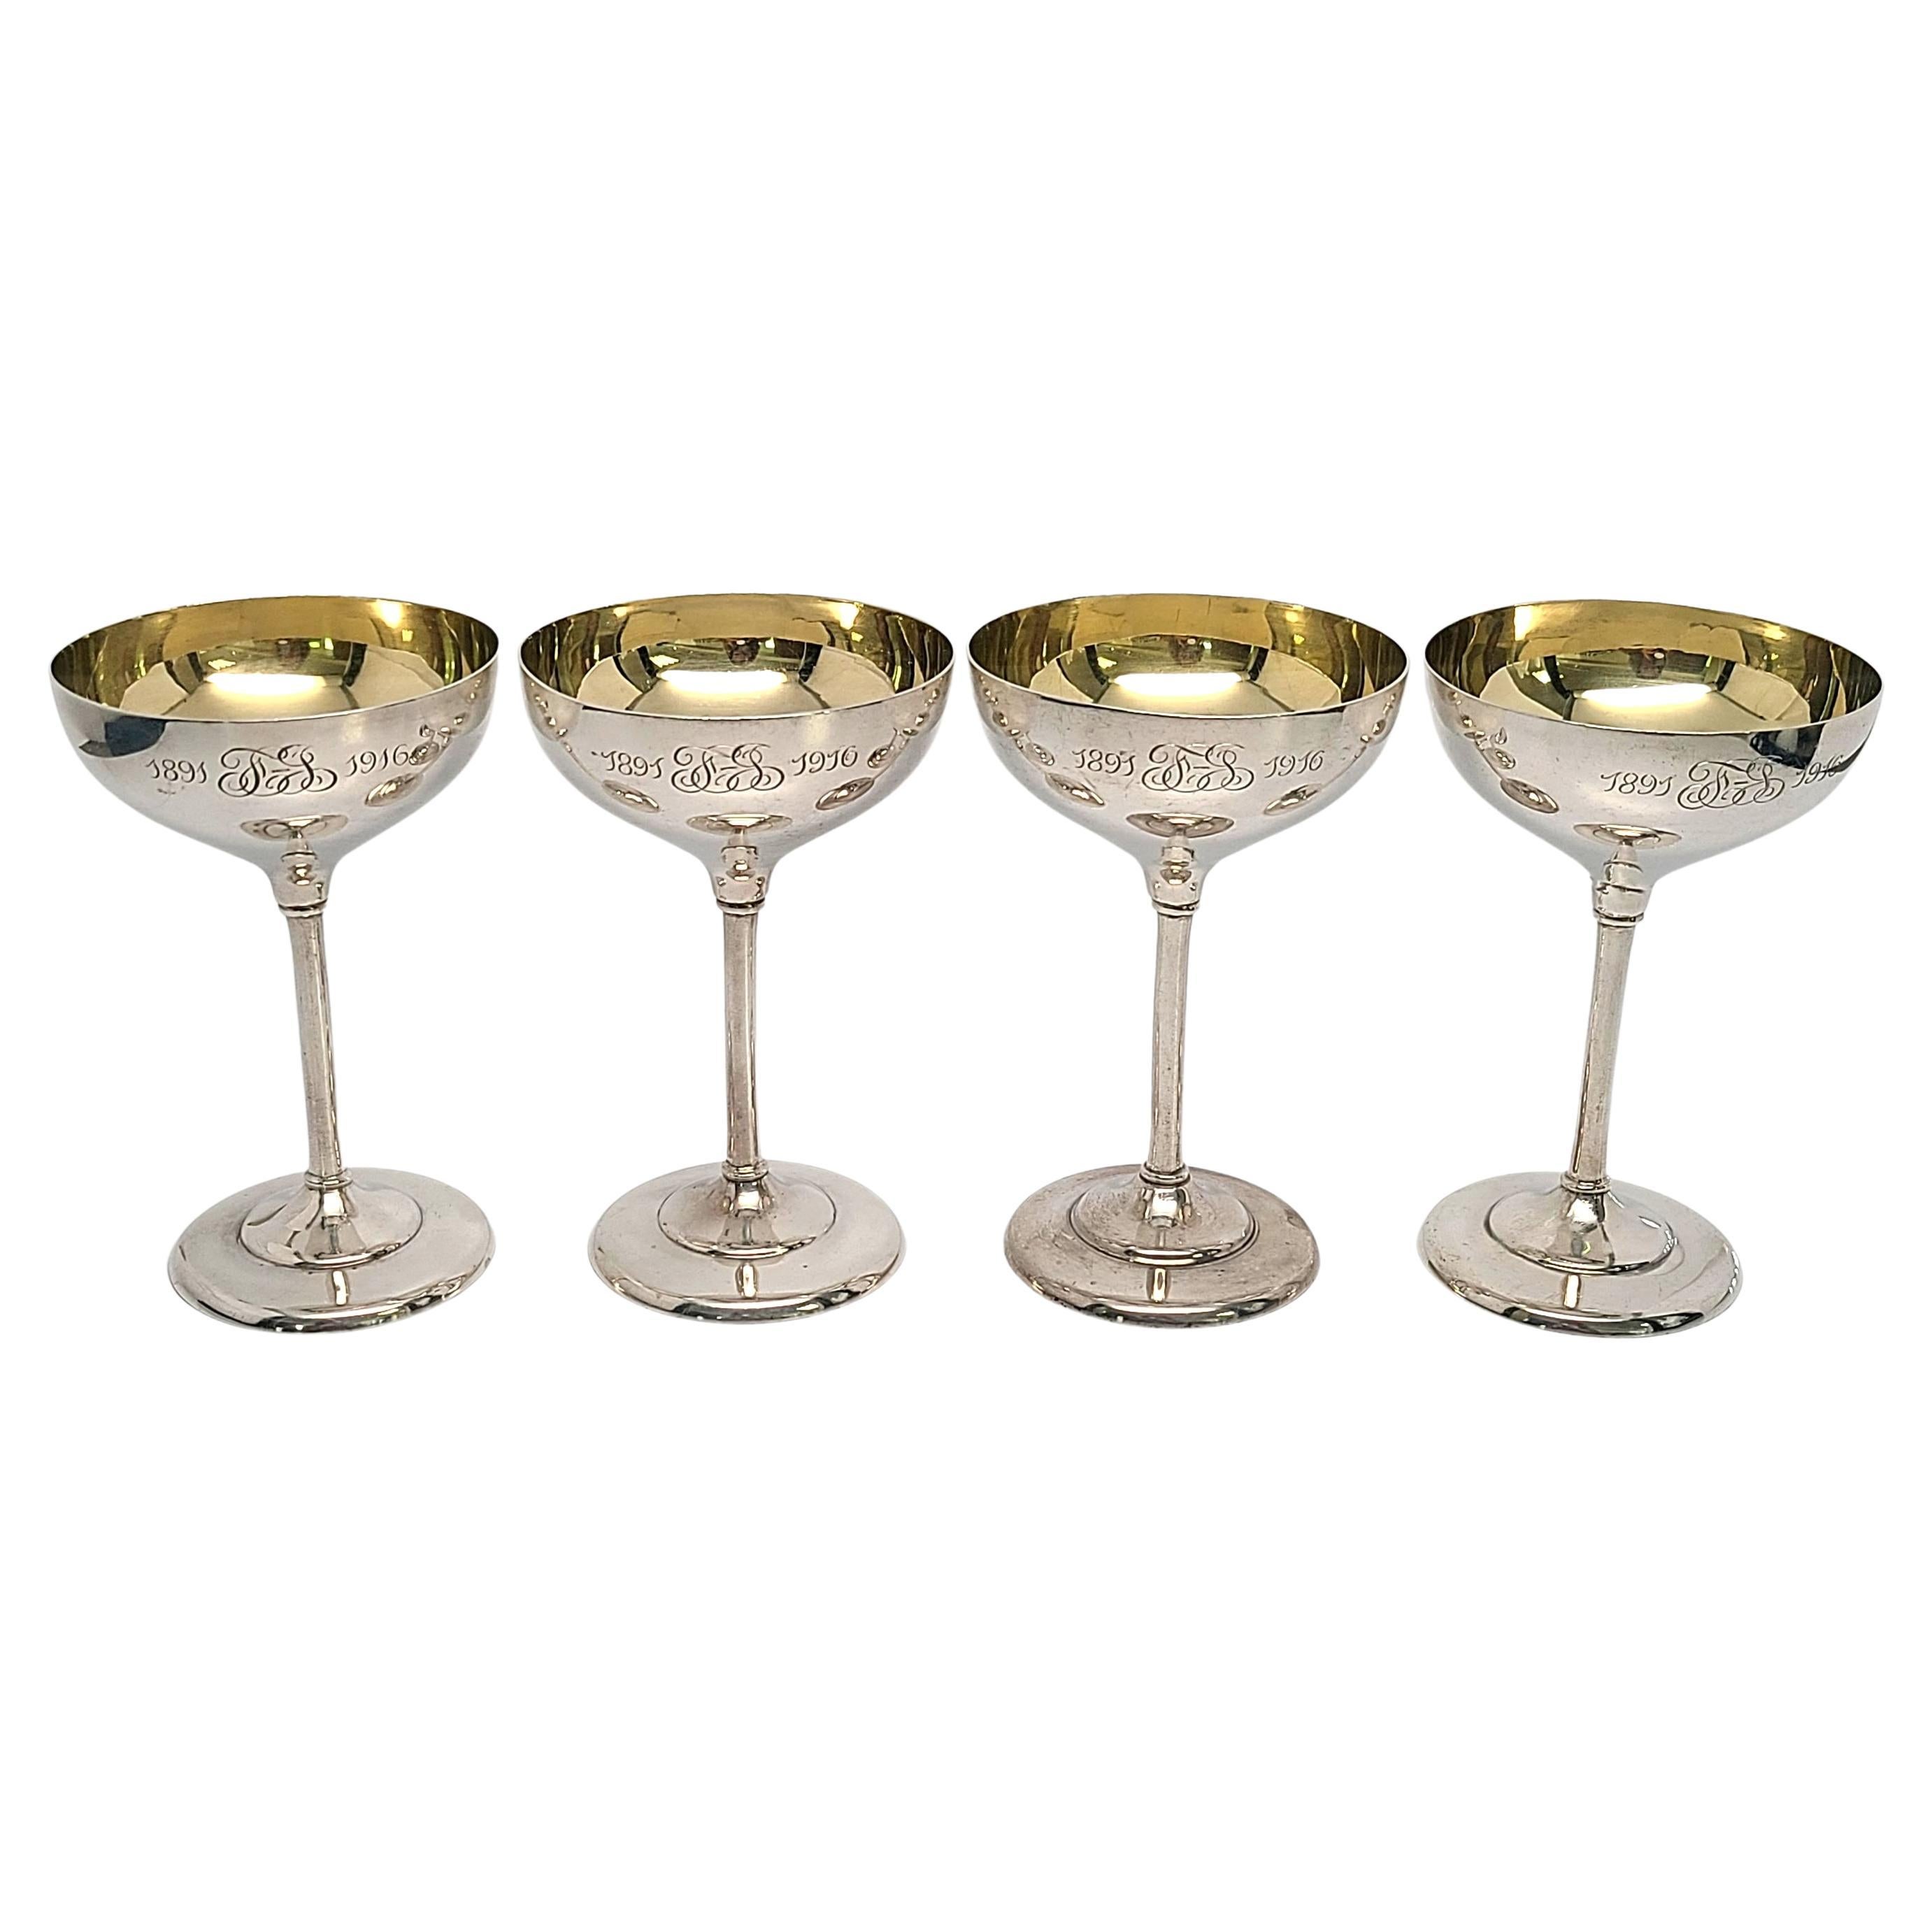 Set of 4 Barbour Silver Co Champagne/Cocktail Goblet with Engraving